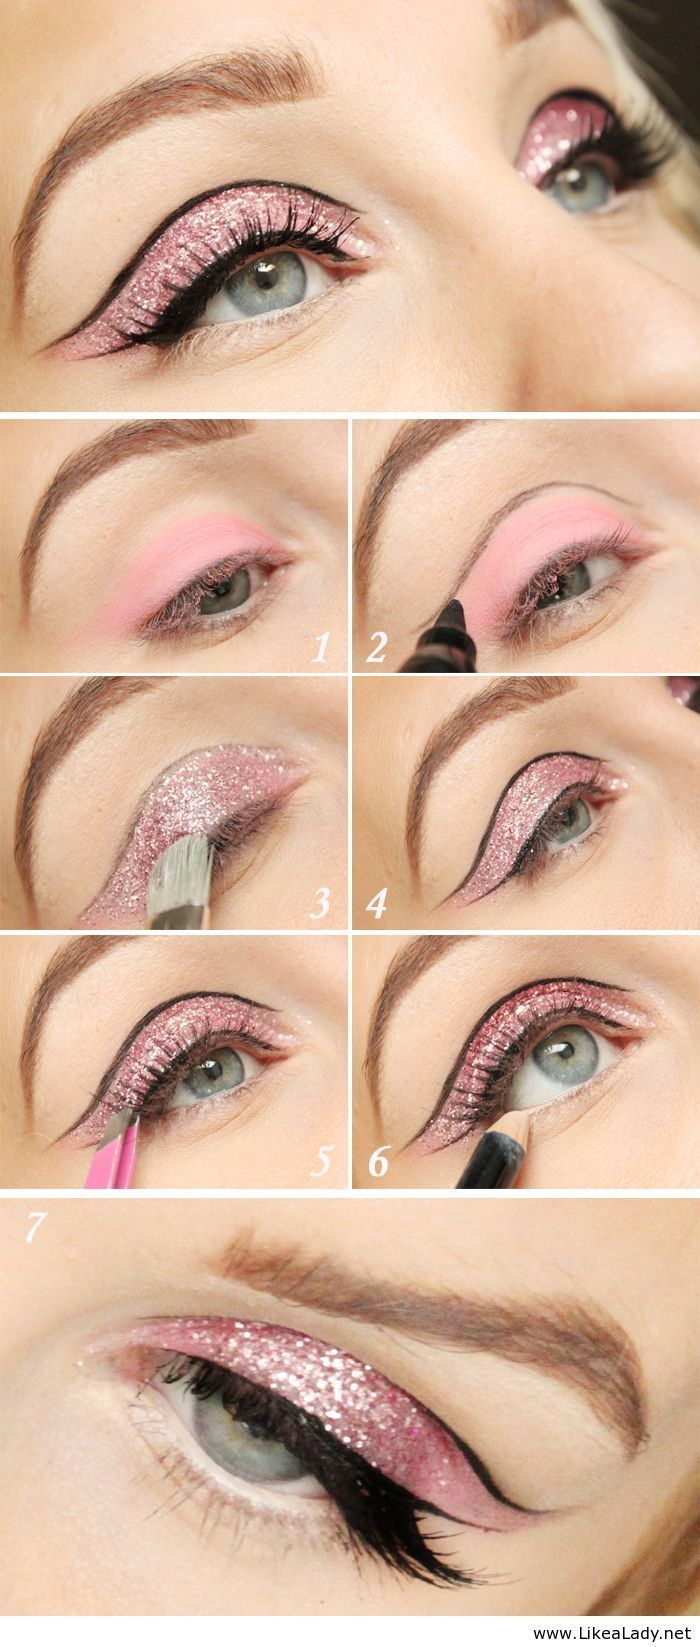 Black Eye Makeup Step By Step Glitter Eye Makeup Tutorials Are Quite Easy To Achieve